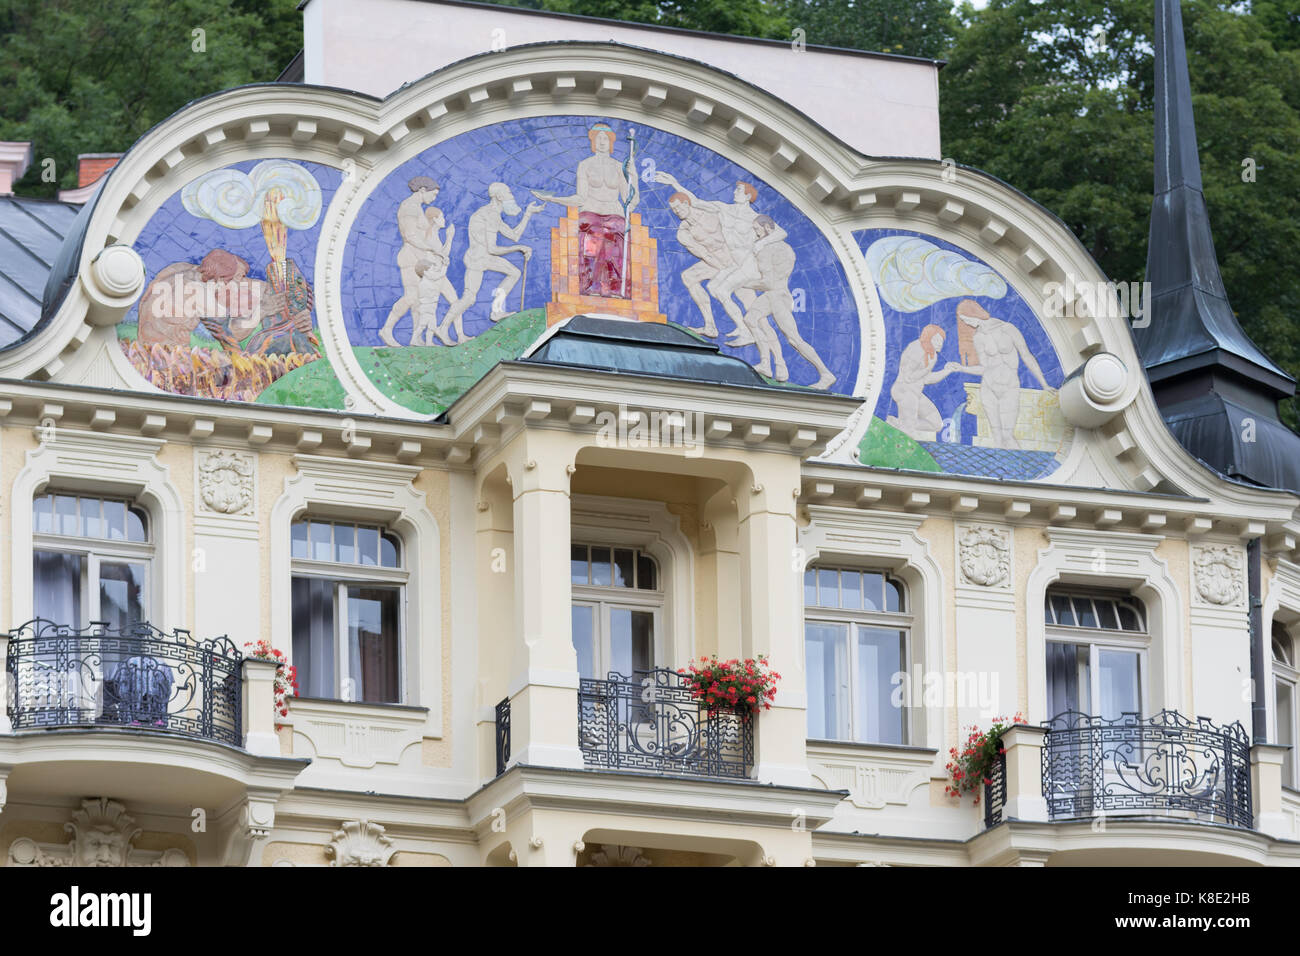 Karlovy Vary, Czech Republic - August 15, 2017:Detail of a condominium with two windows overlaid by a colorful mosaic Stock Photo